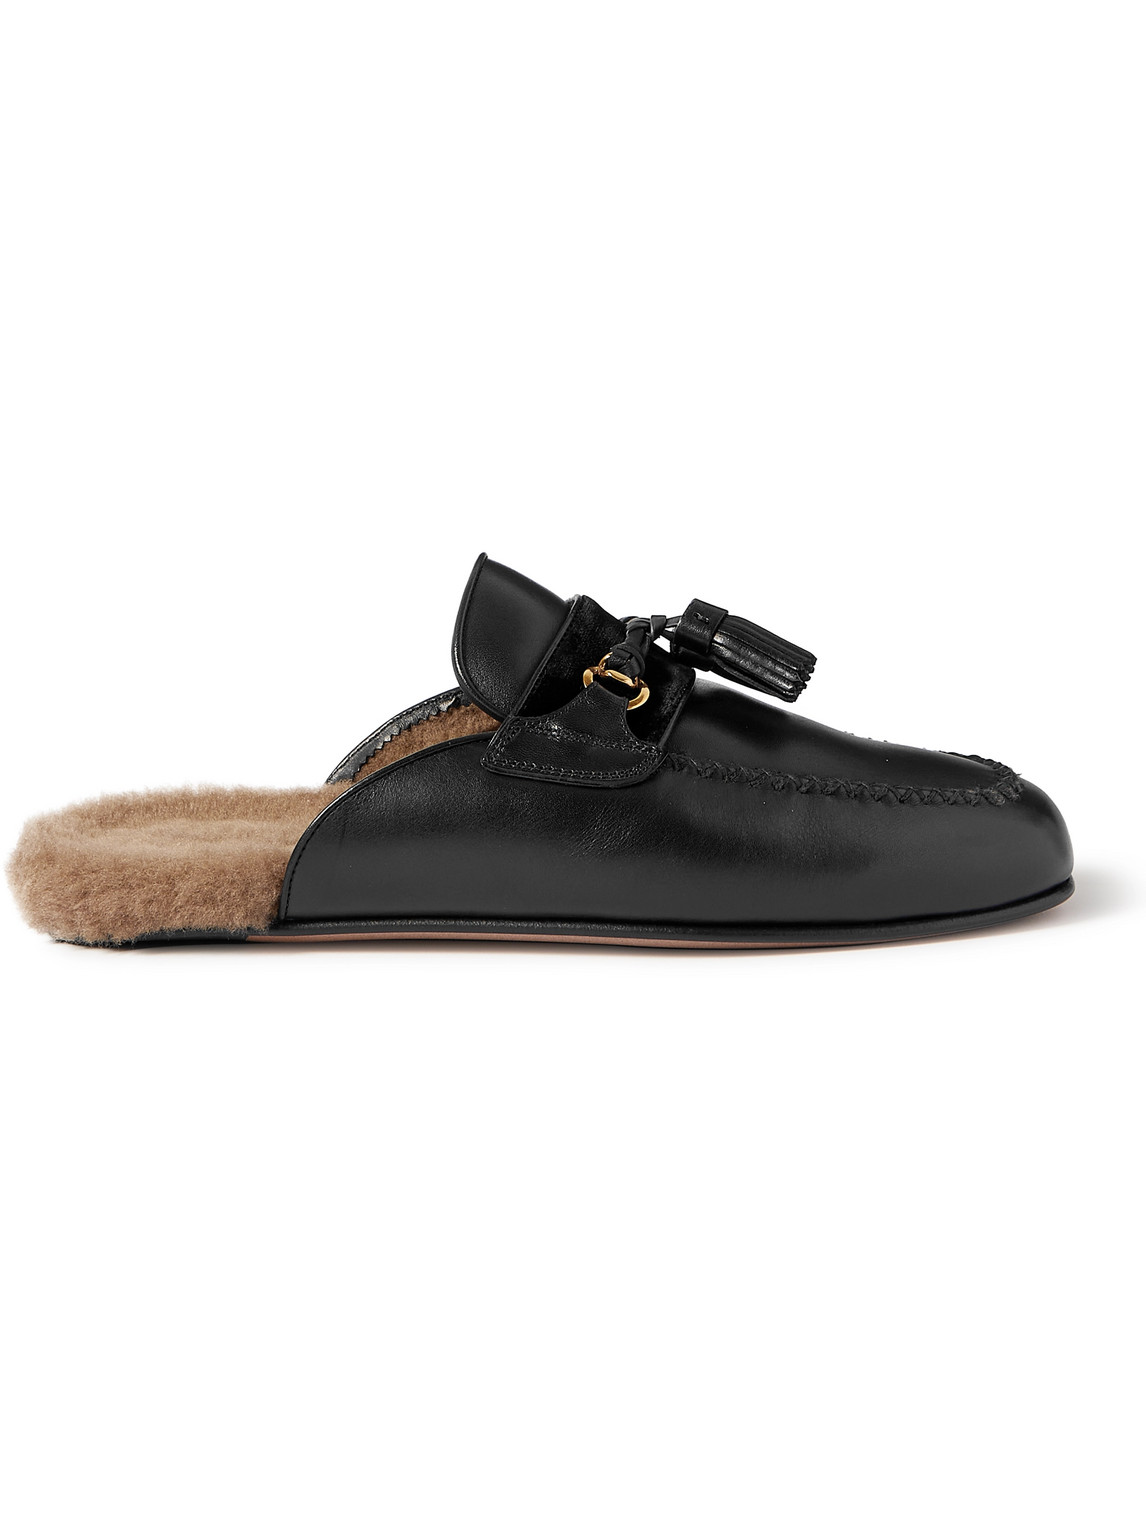 Tom Ford STEPHAN SHEARLING-LINED LEATHER TASSELLED BACKLESS LOAFERS